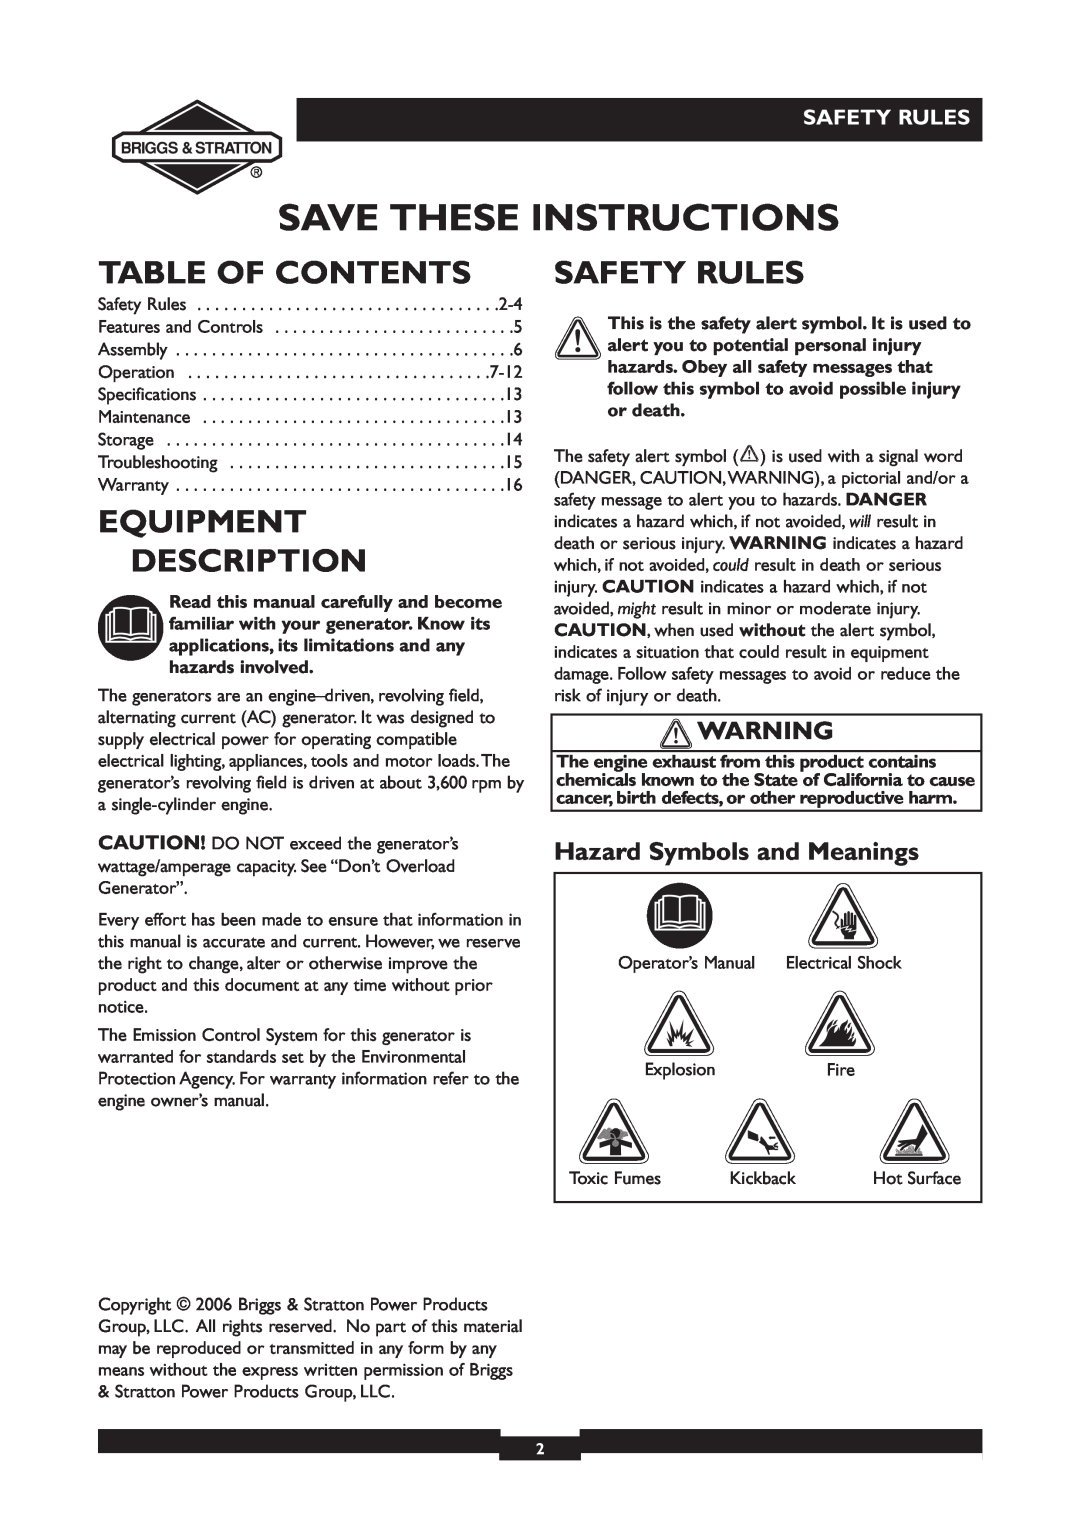 Briggs & Stratton 30231 manual Table Of Contents, Equipment Description, Safety Rules, Hazard Symbols and Meanings 